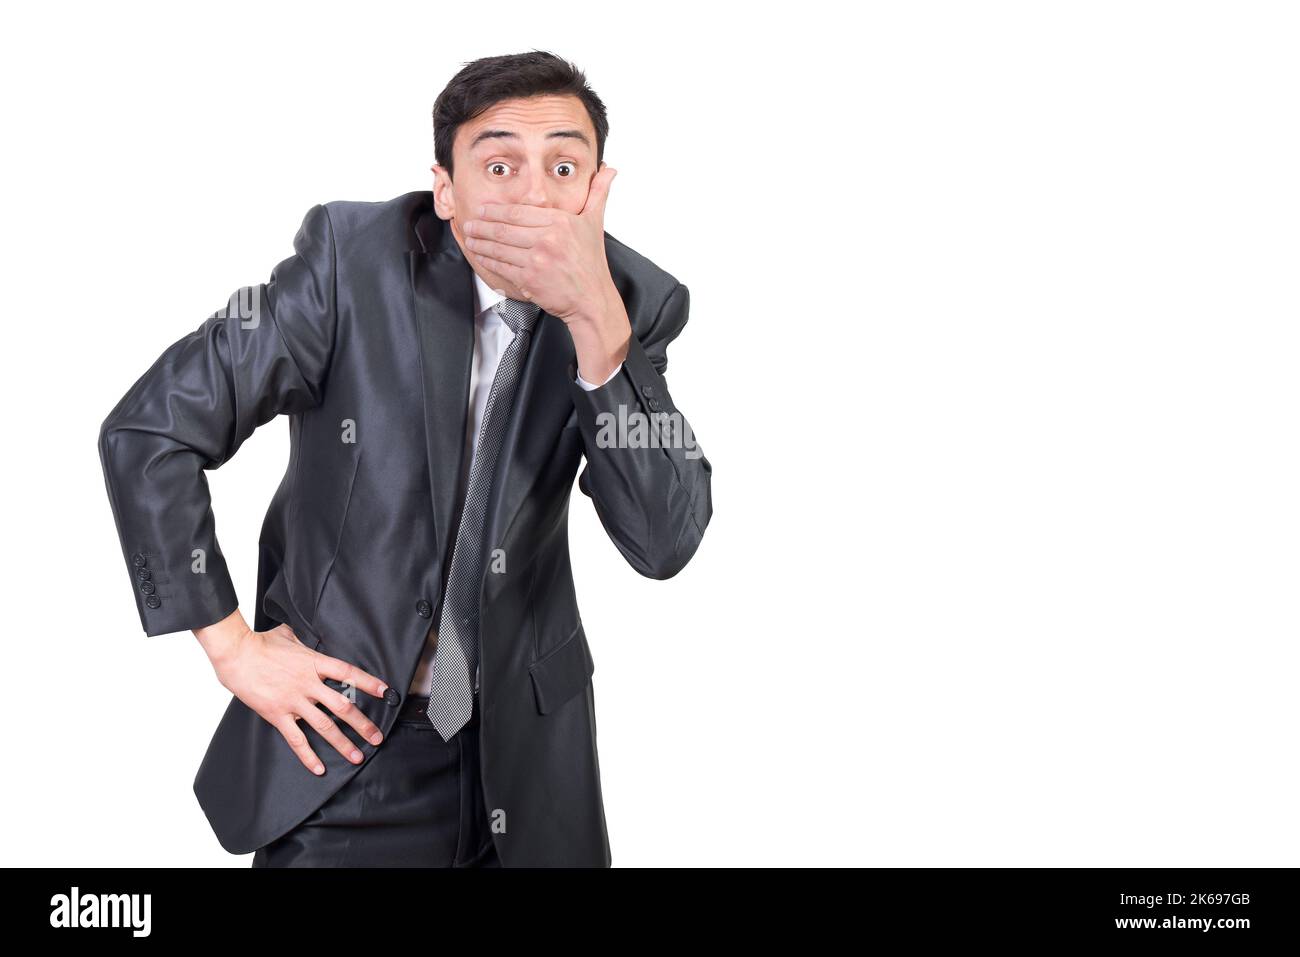 Talkative man in suit covering mouth with hand Stock Photo